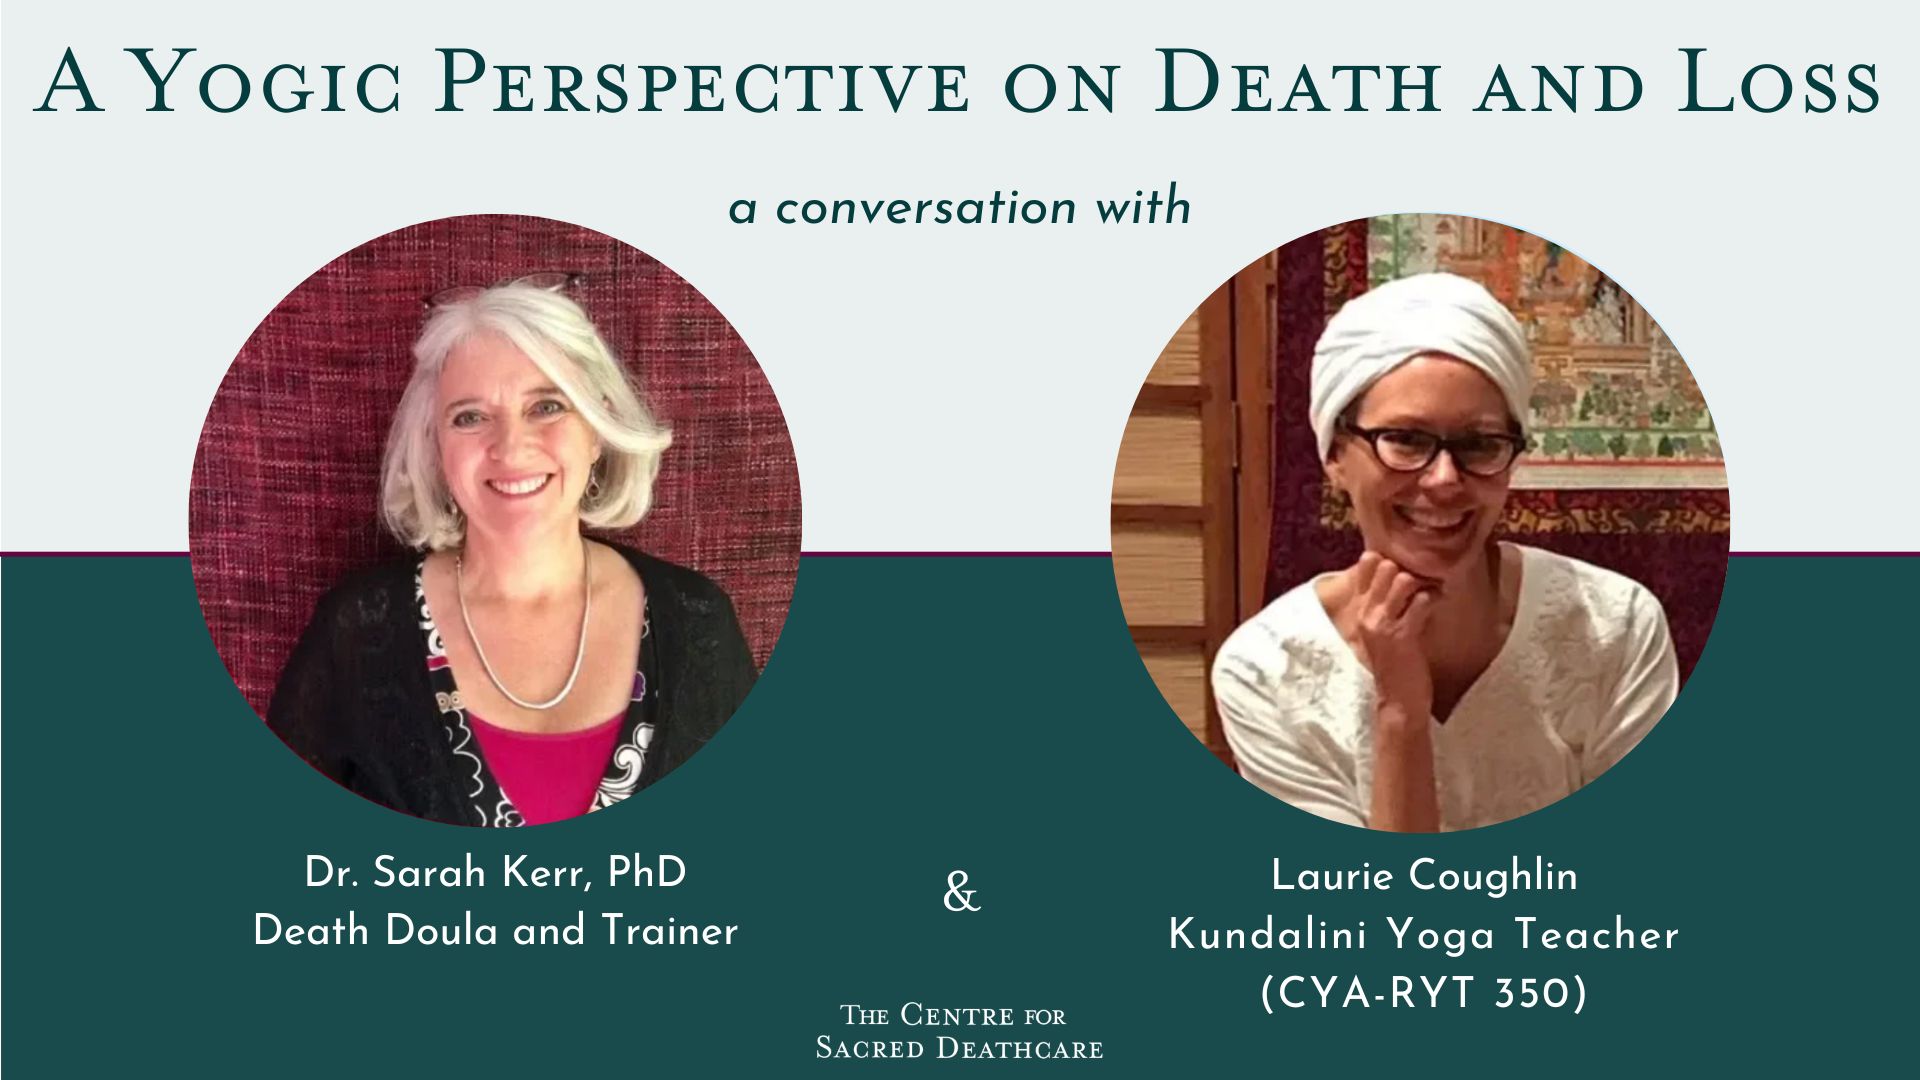 A Yogic Perspective on Death and Dying